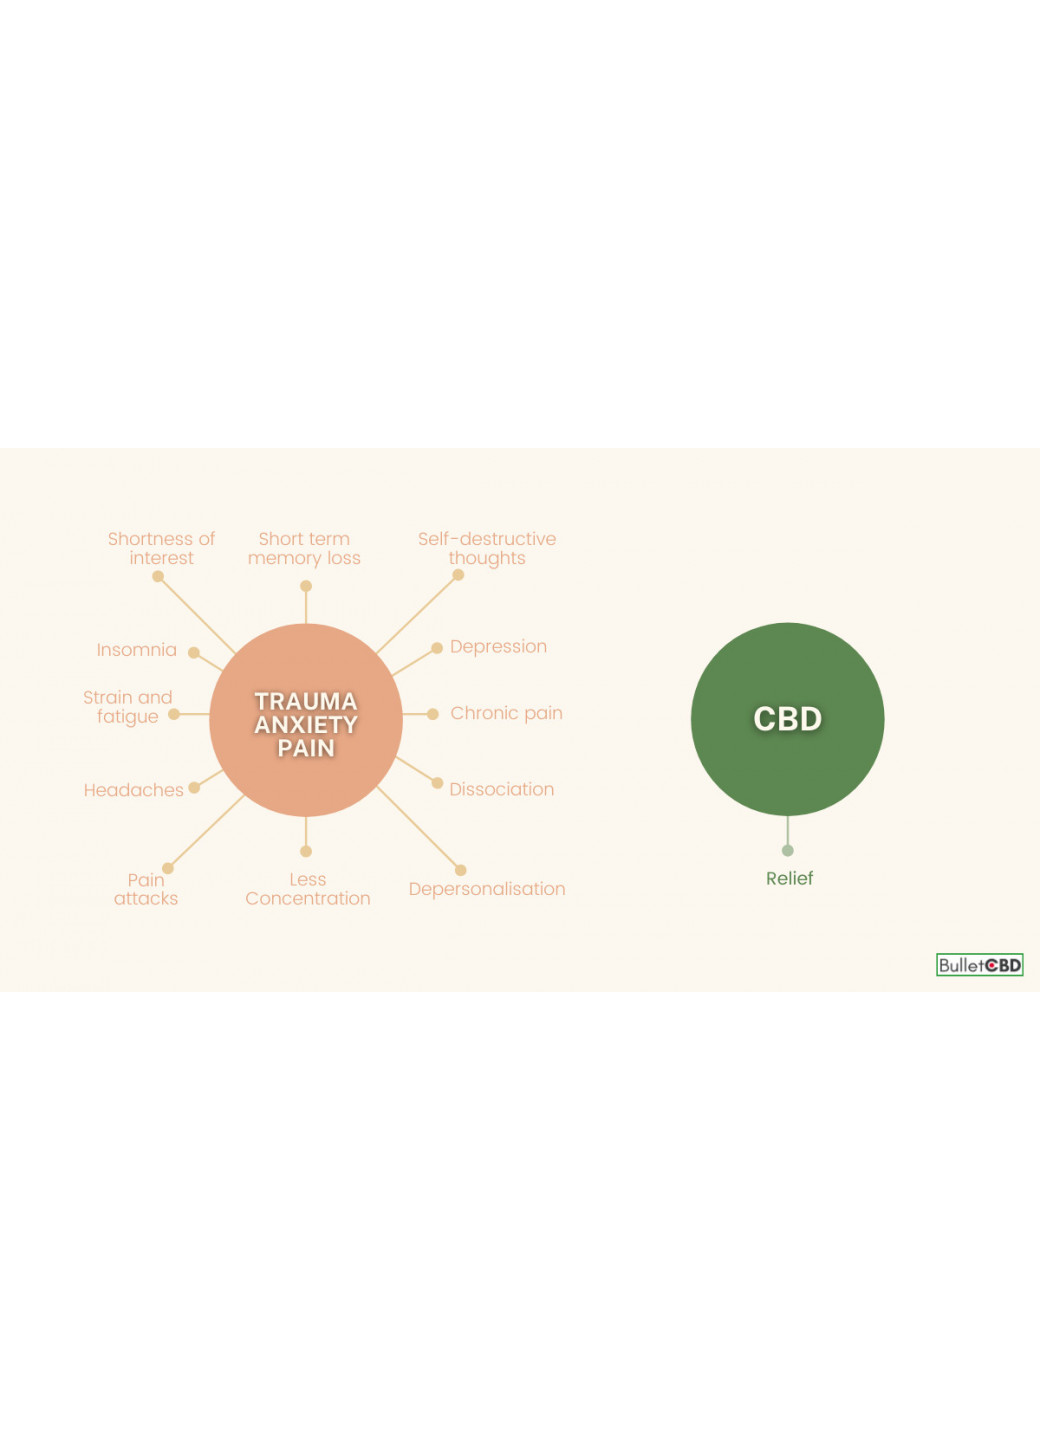 What do you want to know about CBD?